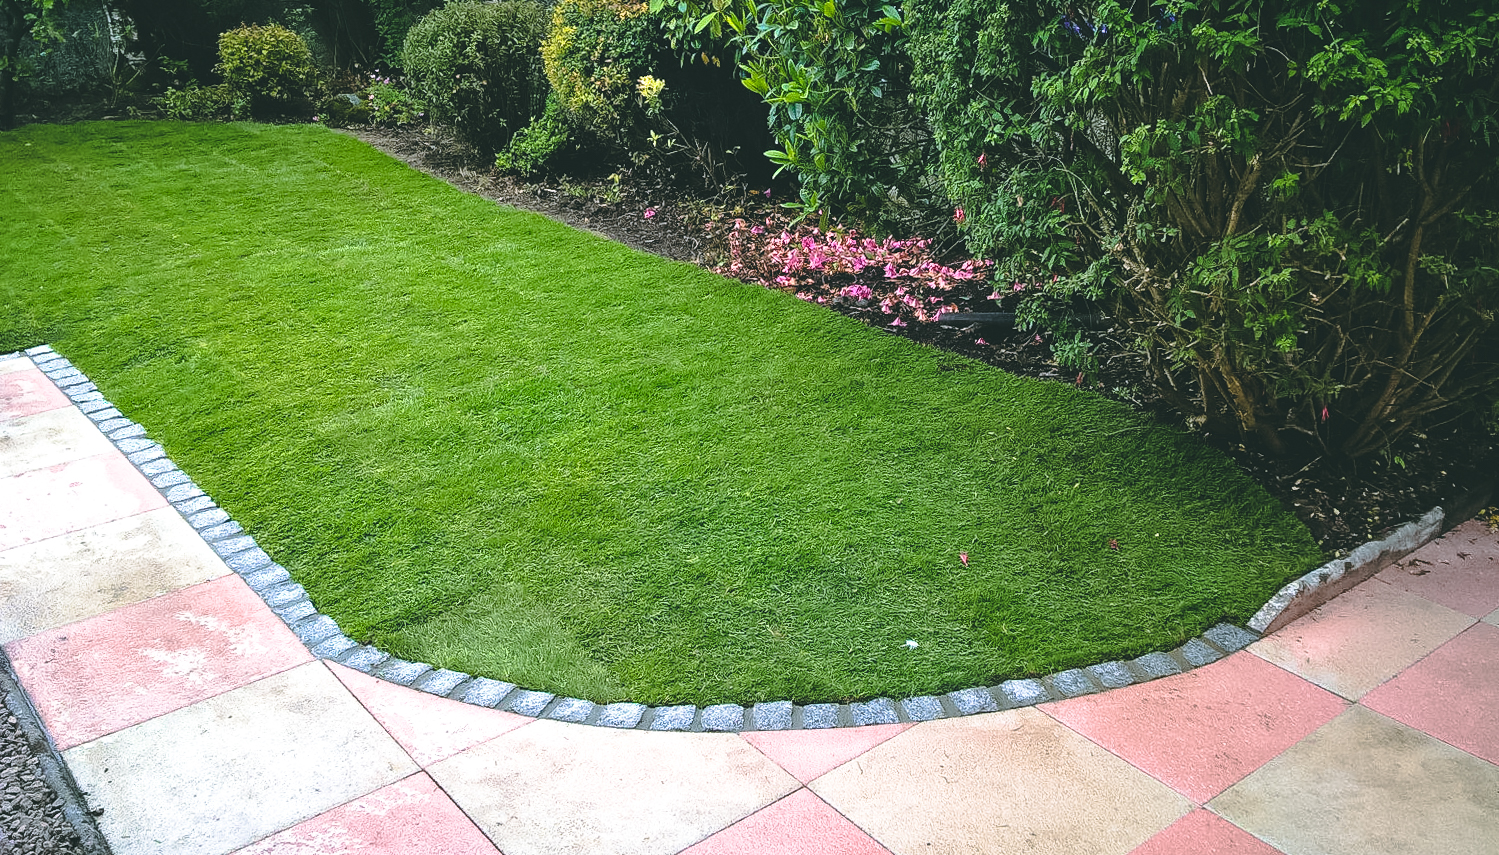 New slabbed area with granite edging and lawn